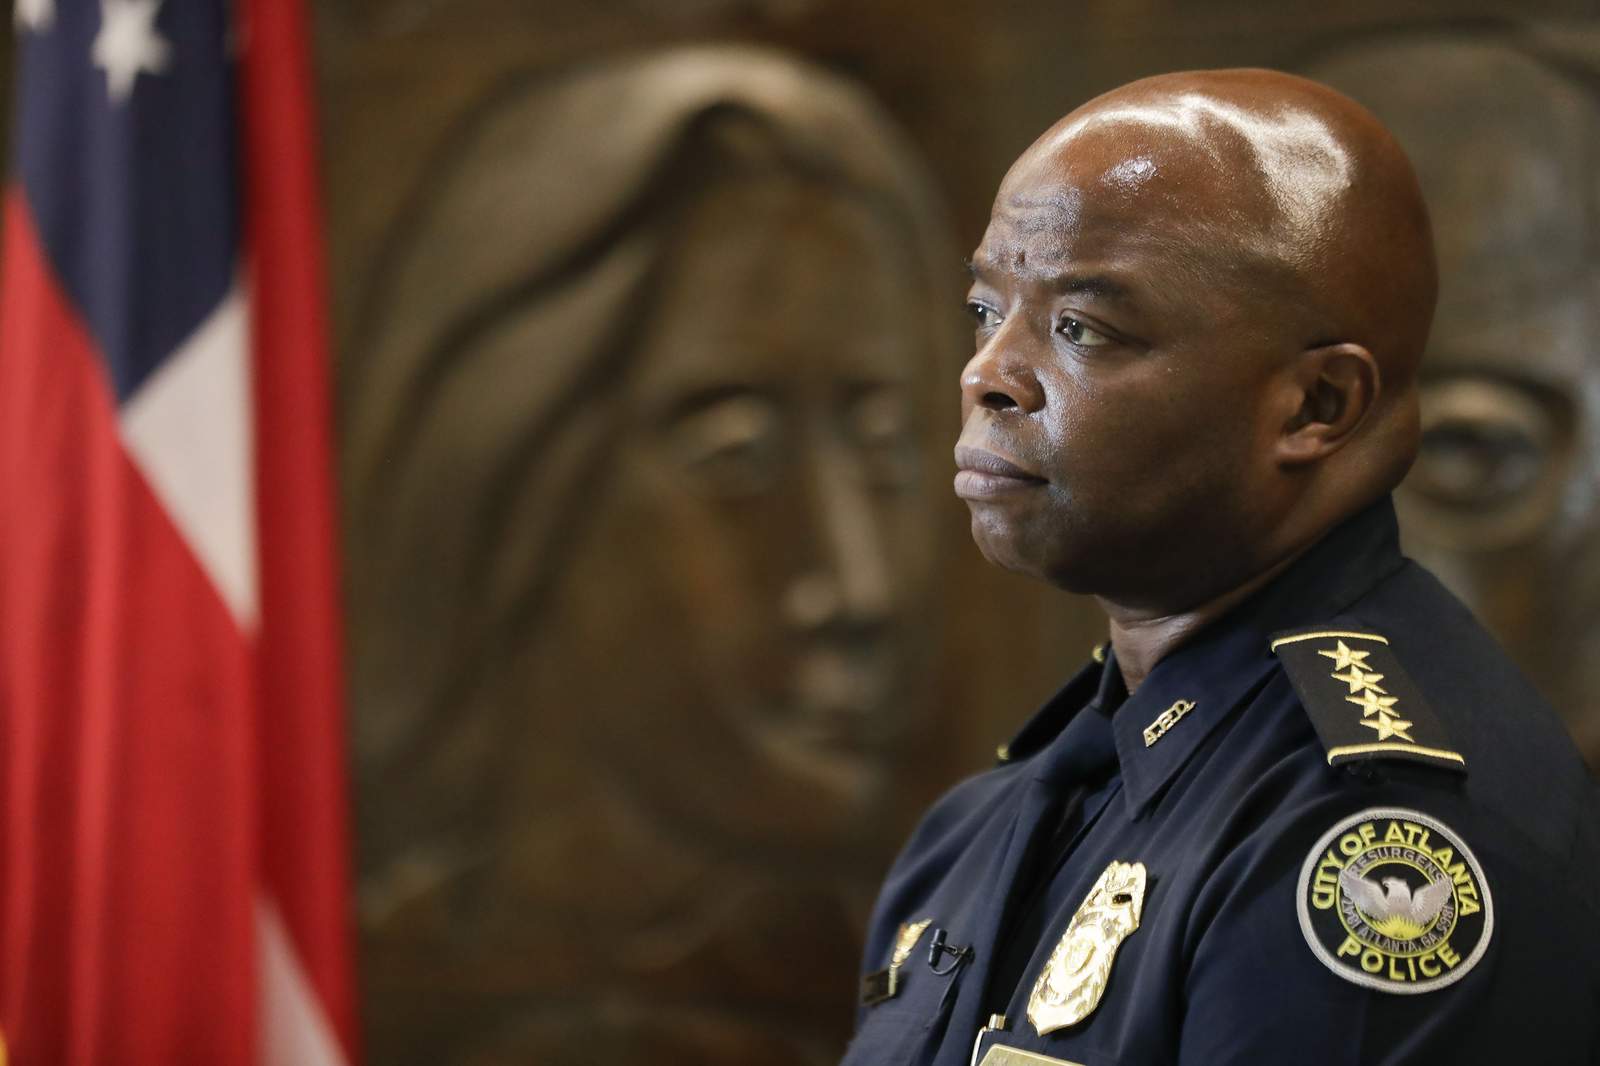 Atlanta police call out sick over charges in fatal shooting